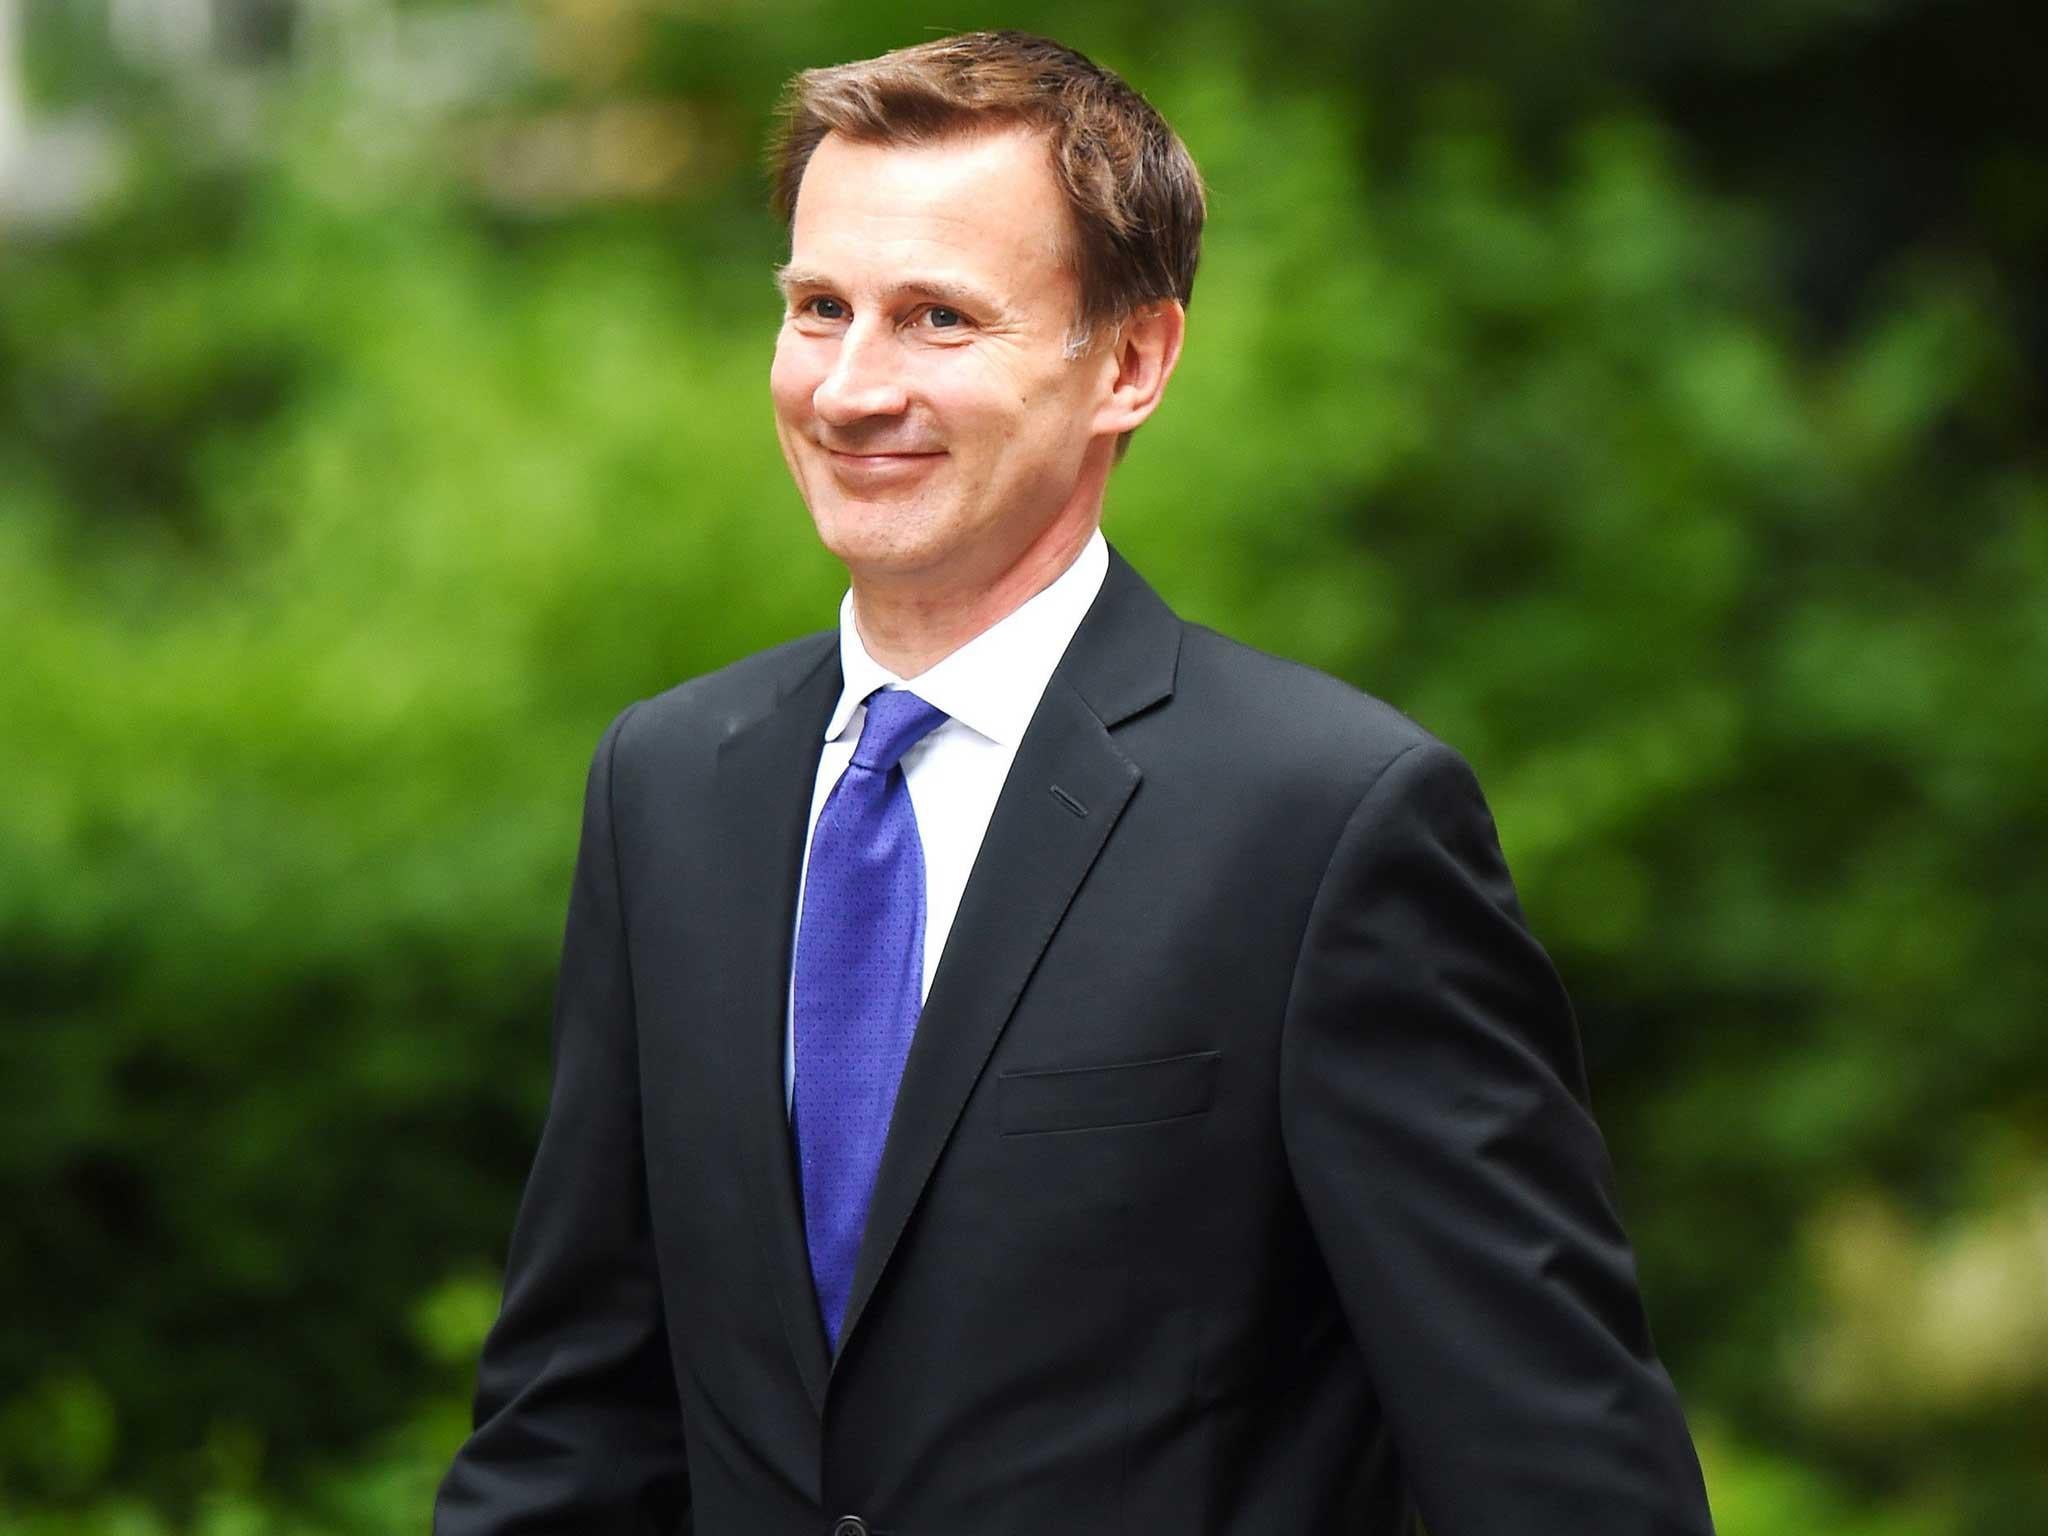 Jeremy Hunt clung on as Culture Secretary despite the row over Rupert Murdoch's takeover bid for Sky, and has survived as Health Secretary long after others would have been sacked